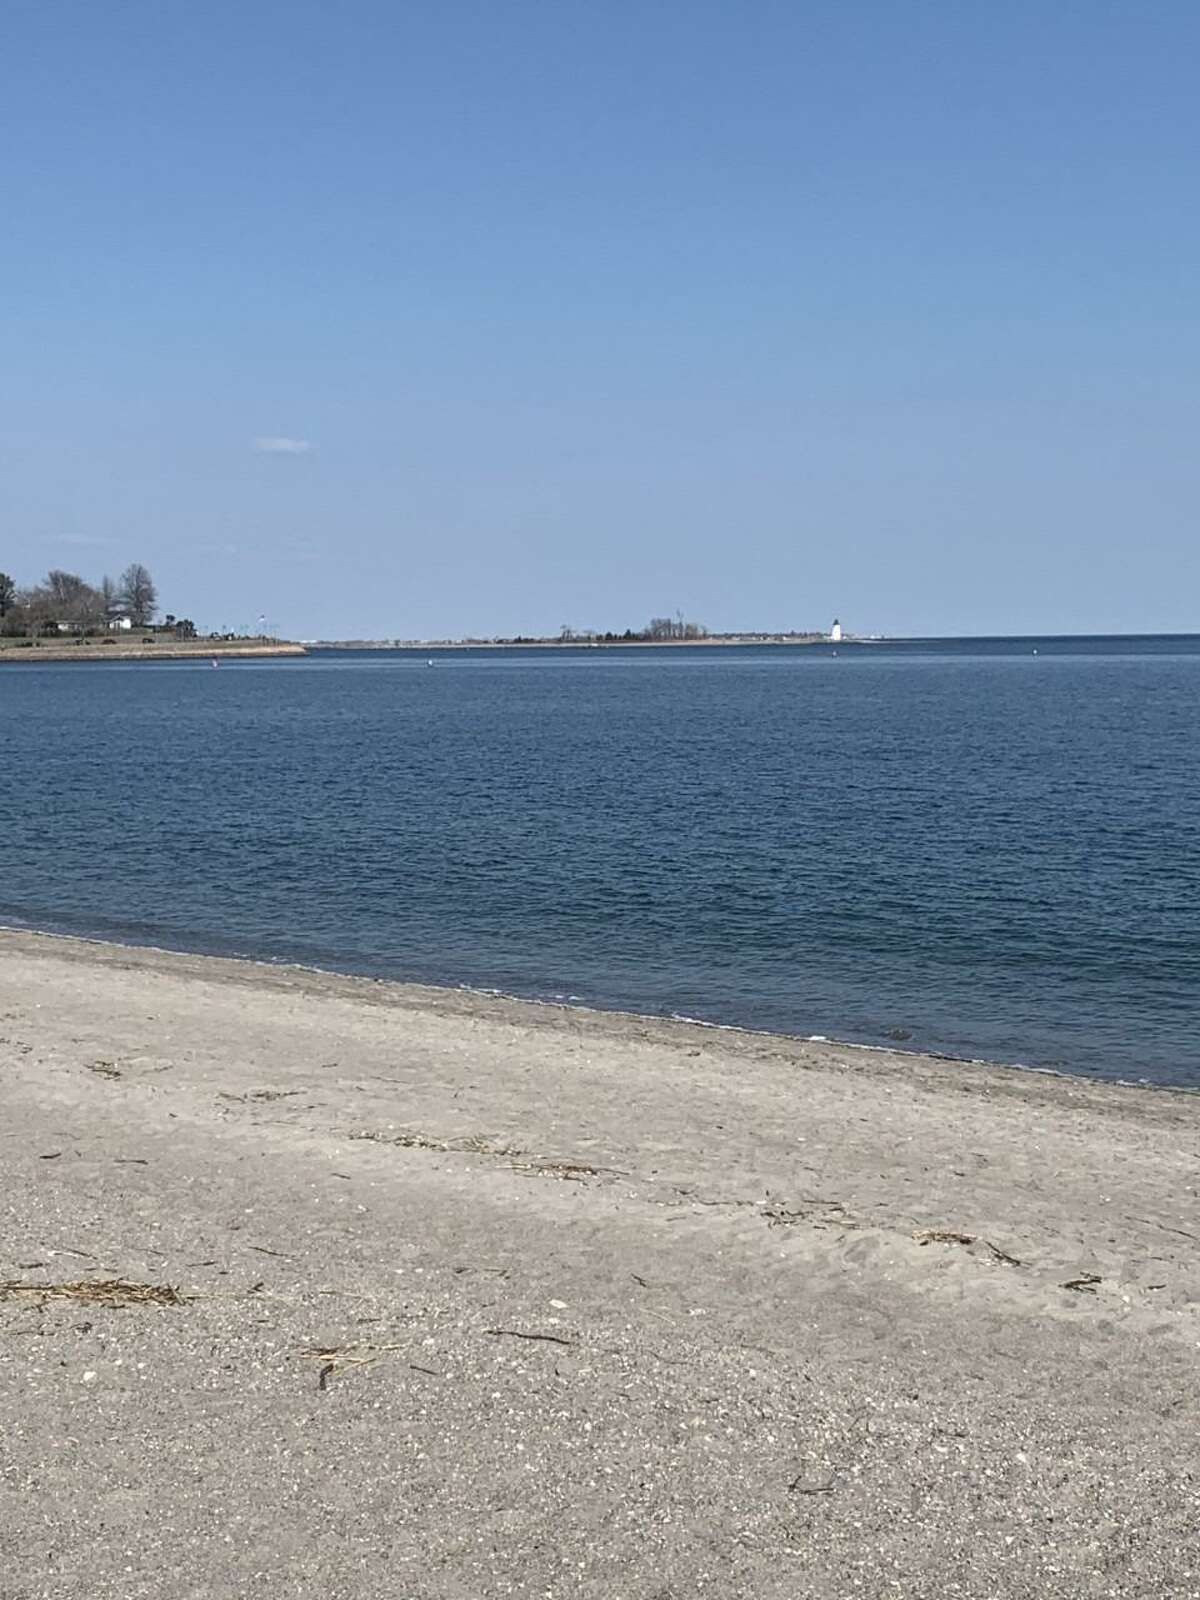 Matthew Podolsky, who is a Fairfield resident, emailed Hearst Connecticut Media this photograph, Sunday, April 4, 2021, of the nice, and windy afternoon on Easter 2021, Sunday, April 4, 2021, at 4:18 p.m., at Jennings Beach in Fairfield.